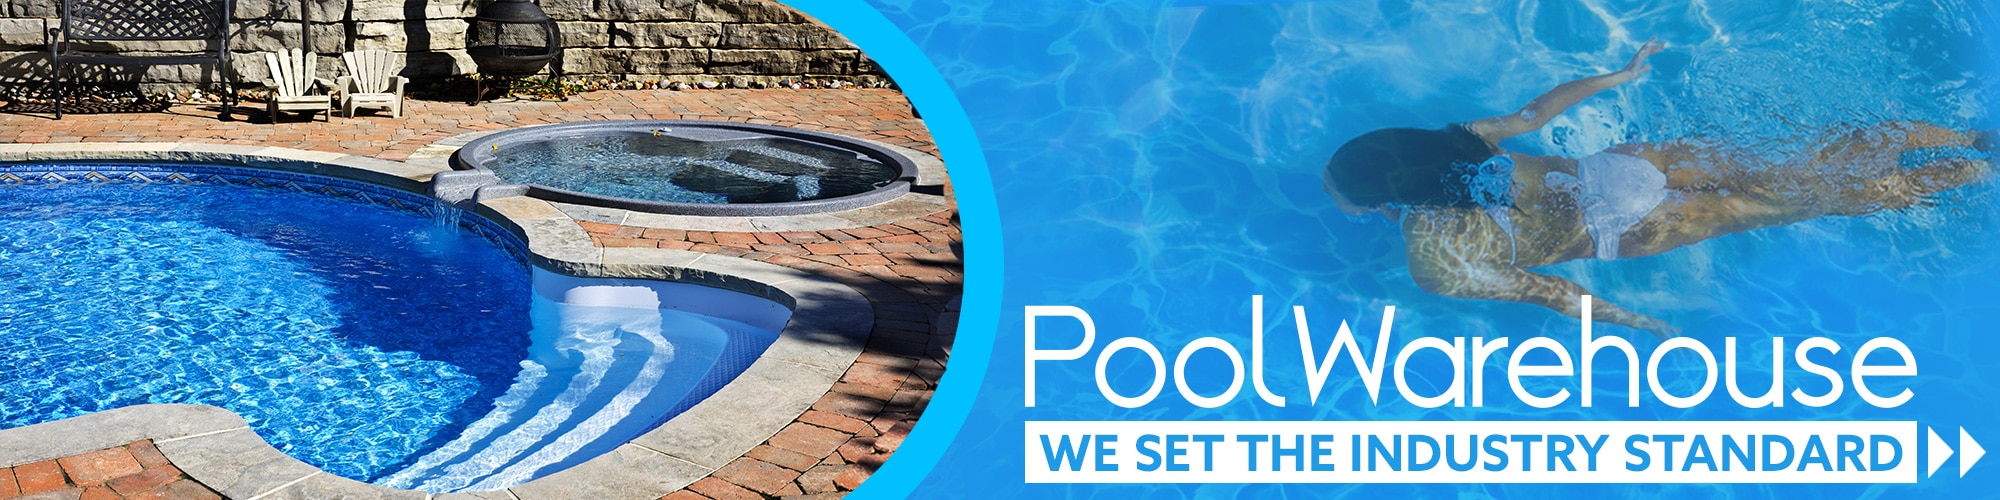 Swimming Pool Liners: What you need to know and why you need one